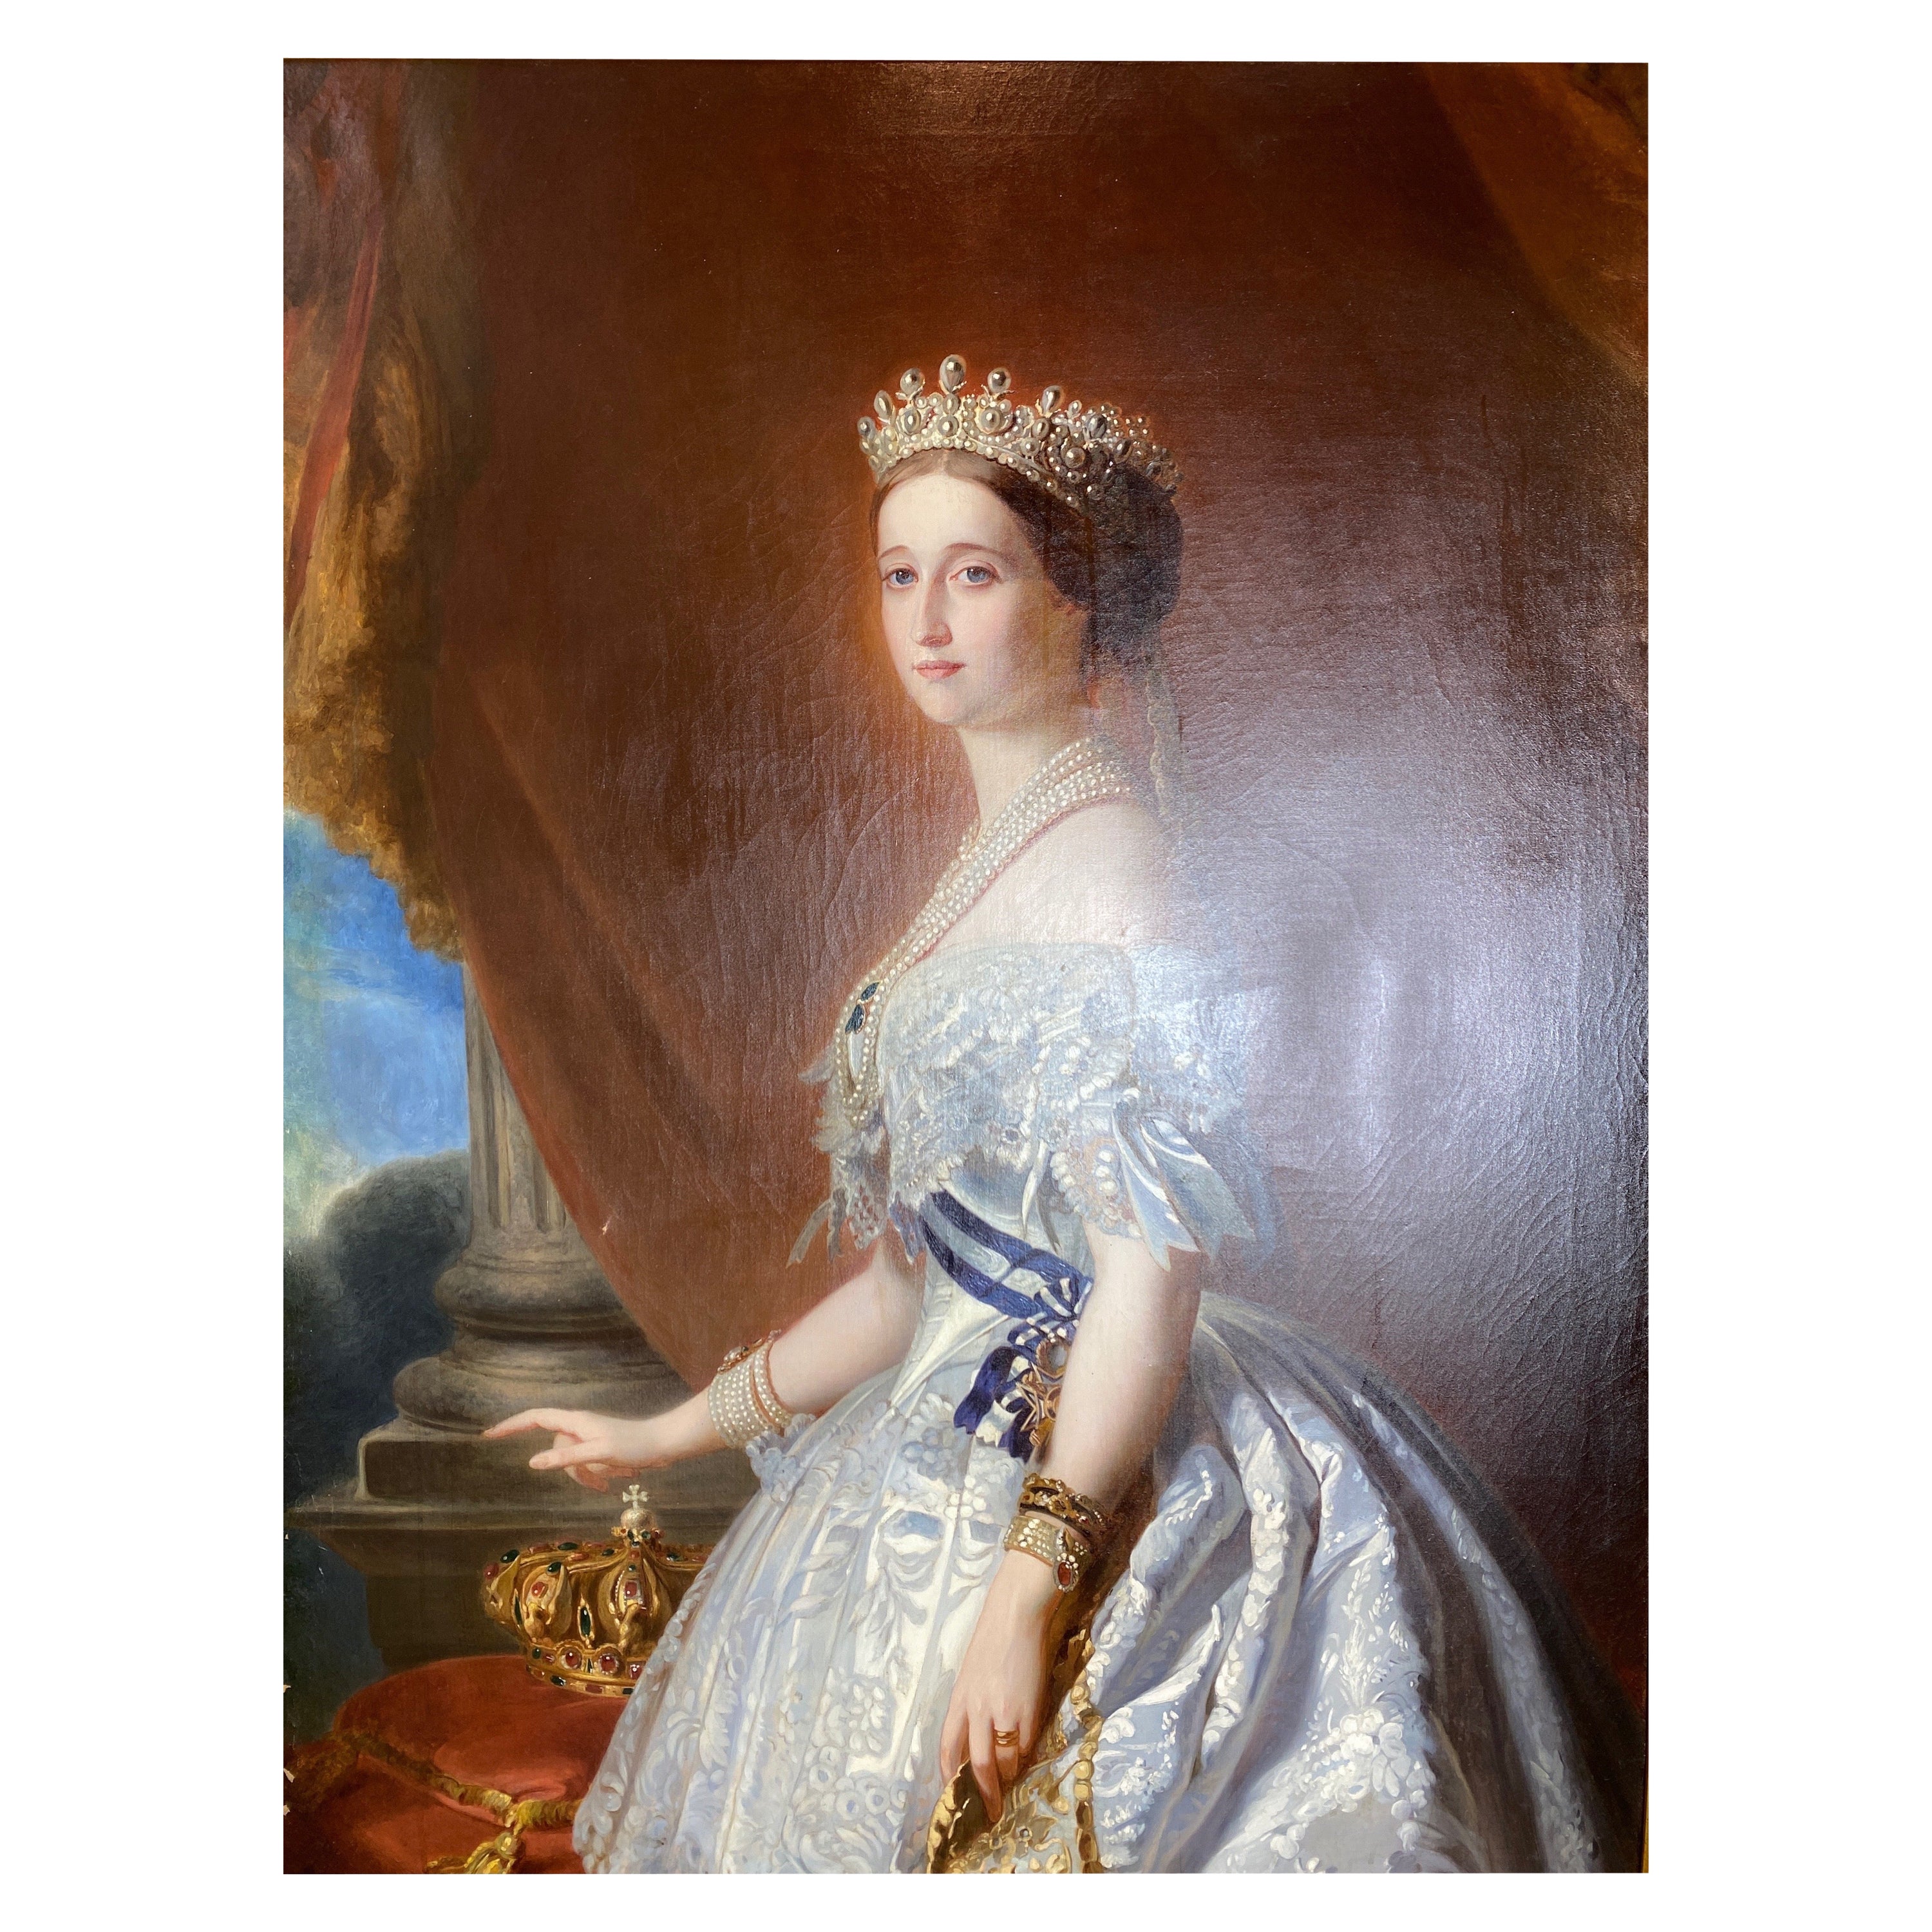 19th Century German Oil on Canvas of Empress Eugenie in a White Court Dress